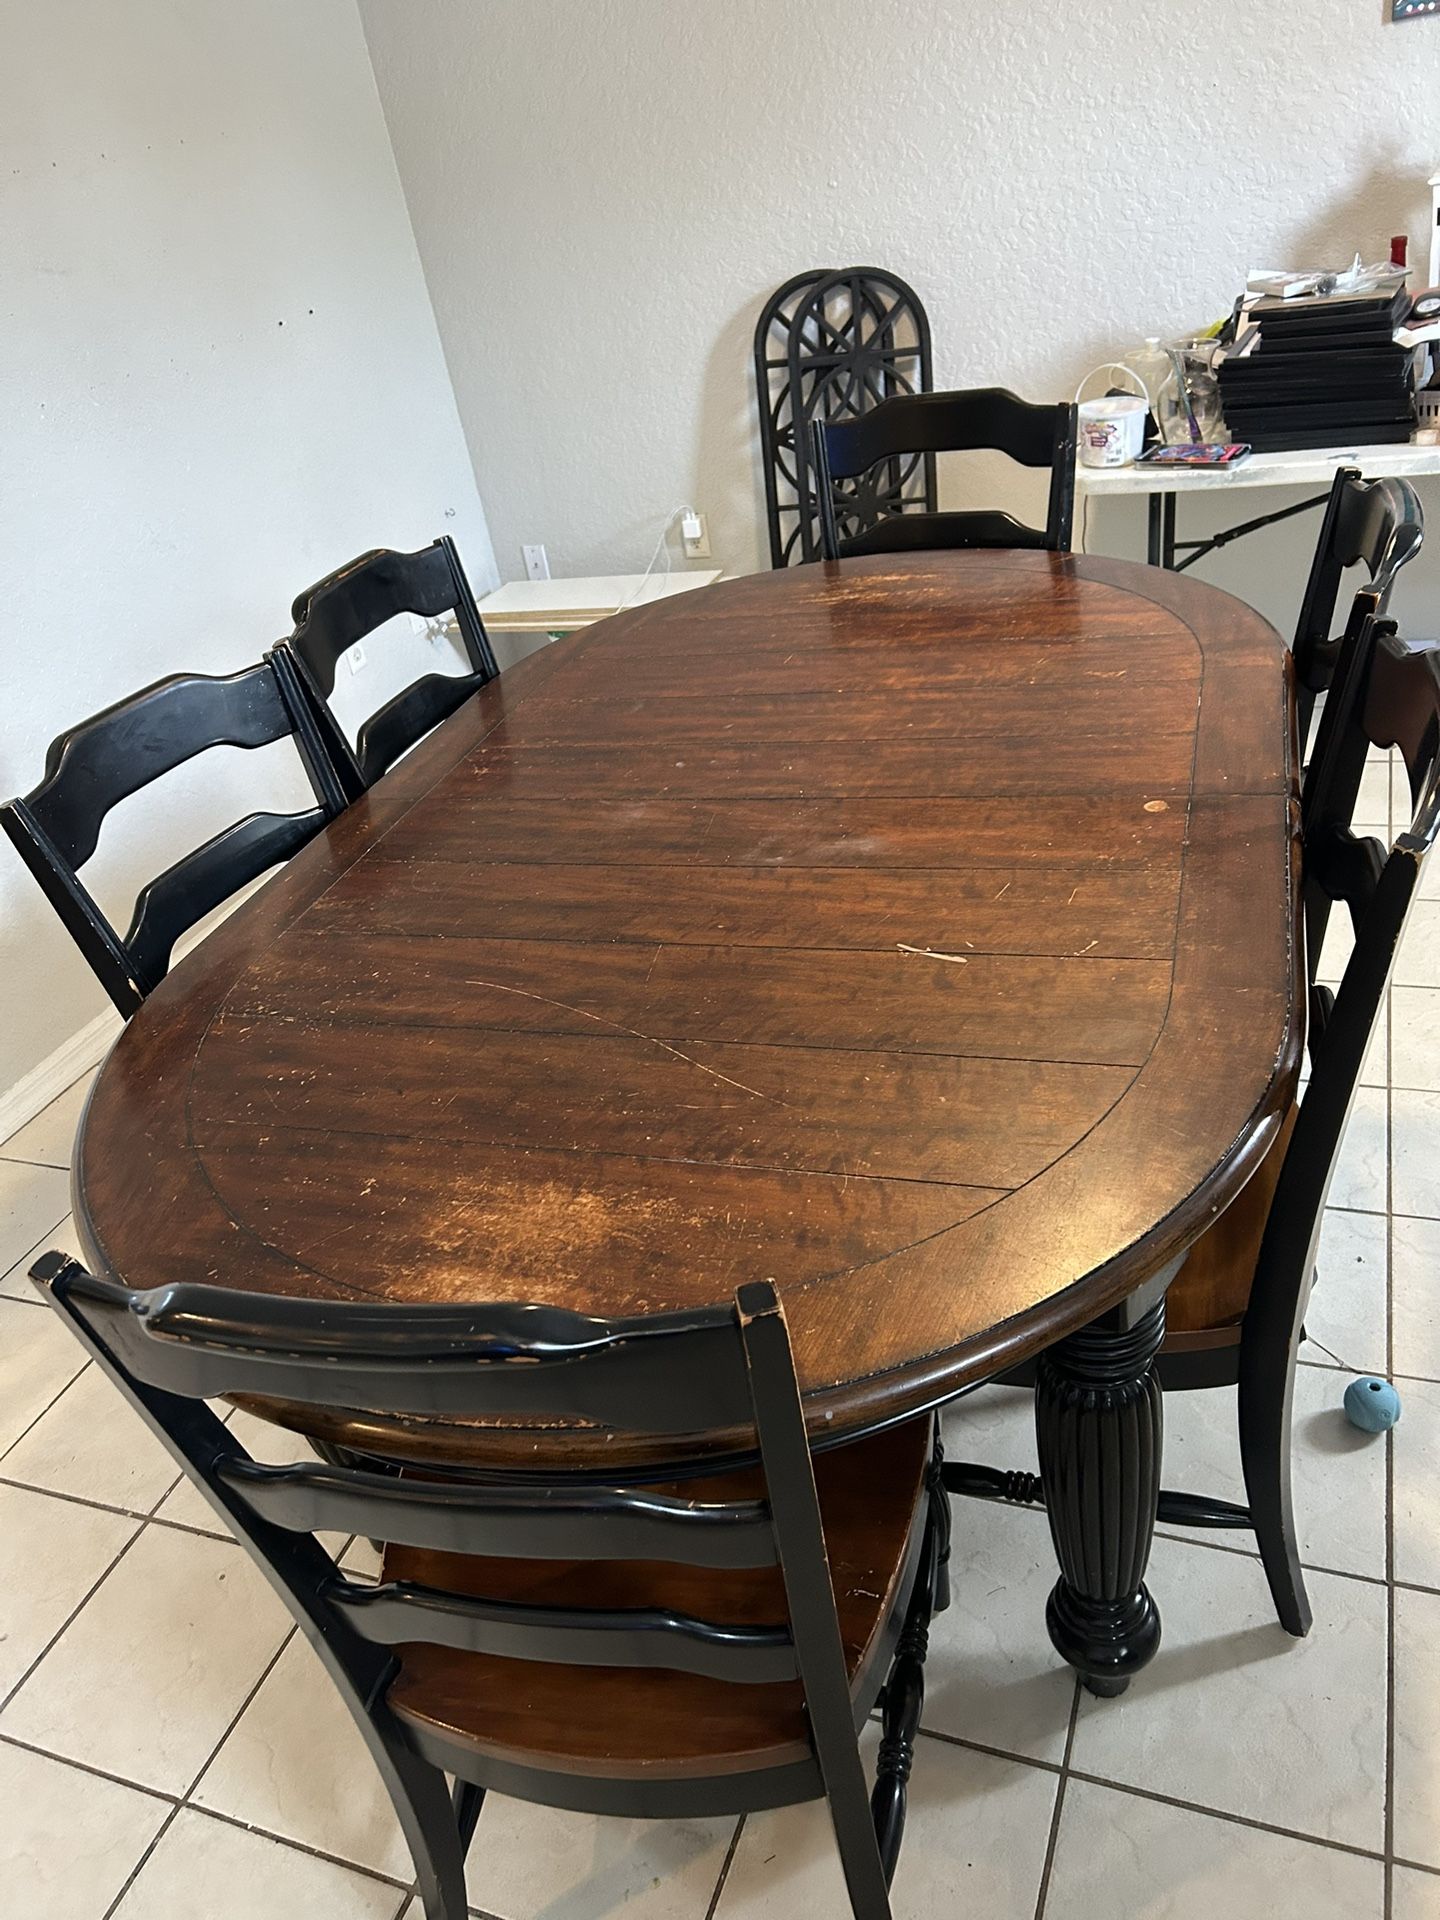 Solid Wood Table With 6 Chairs 